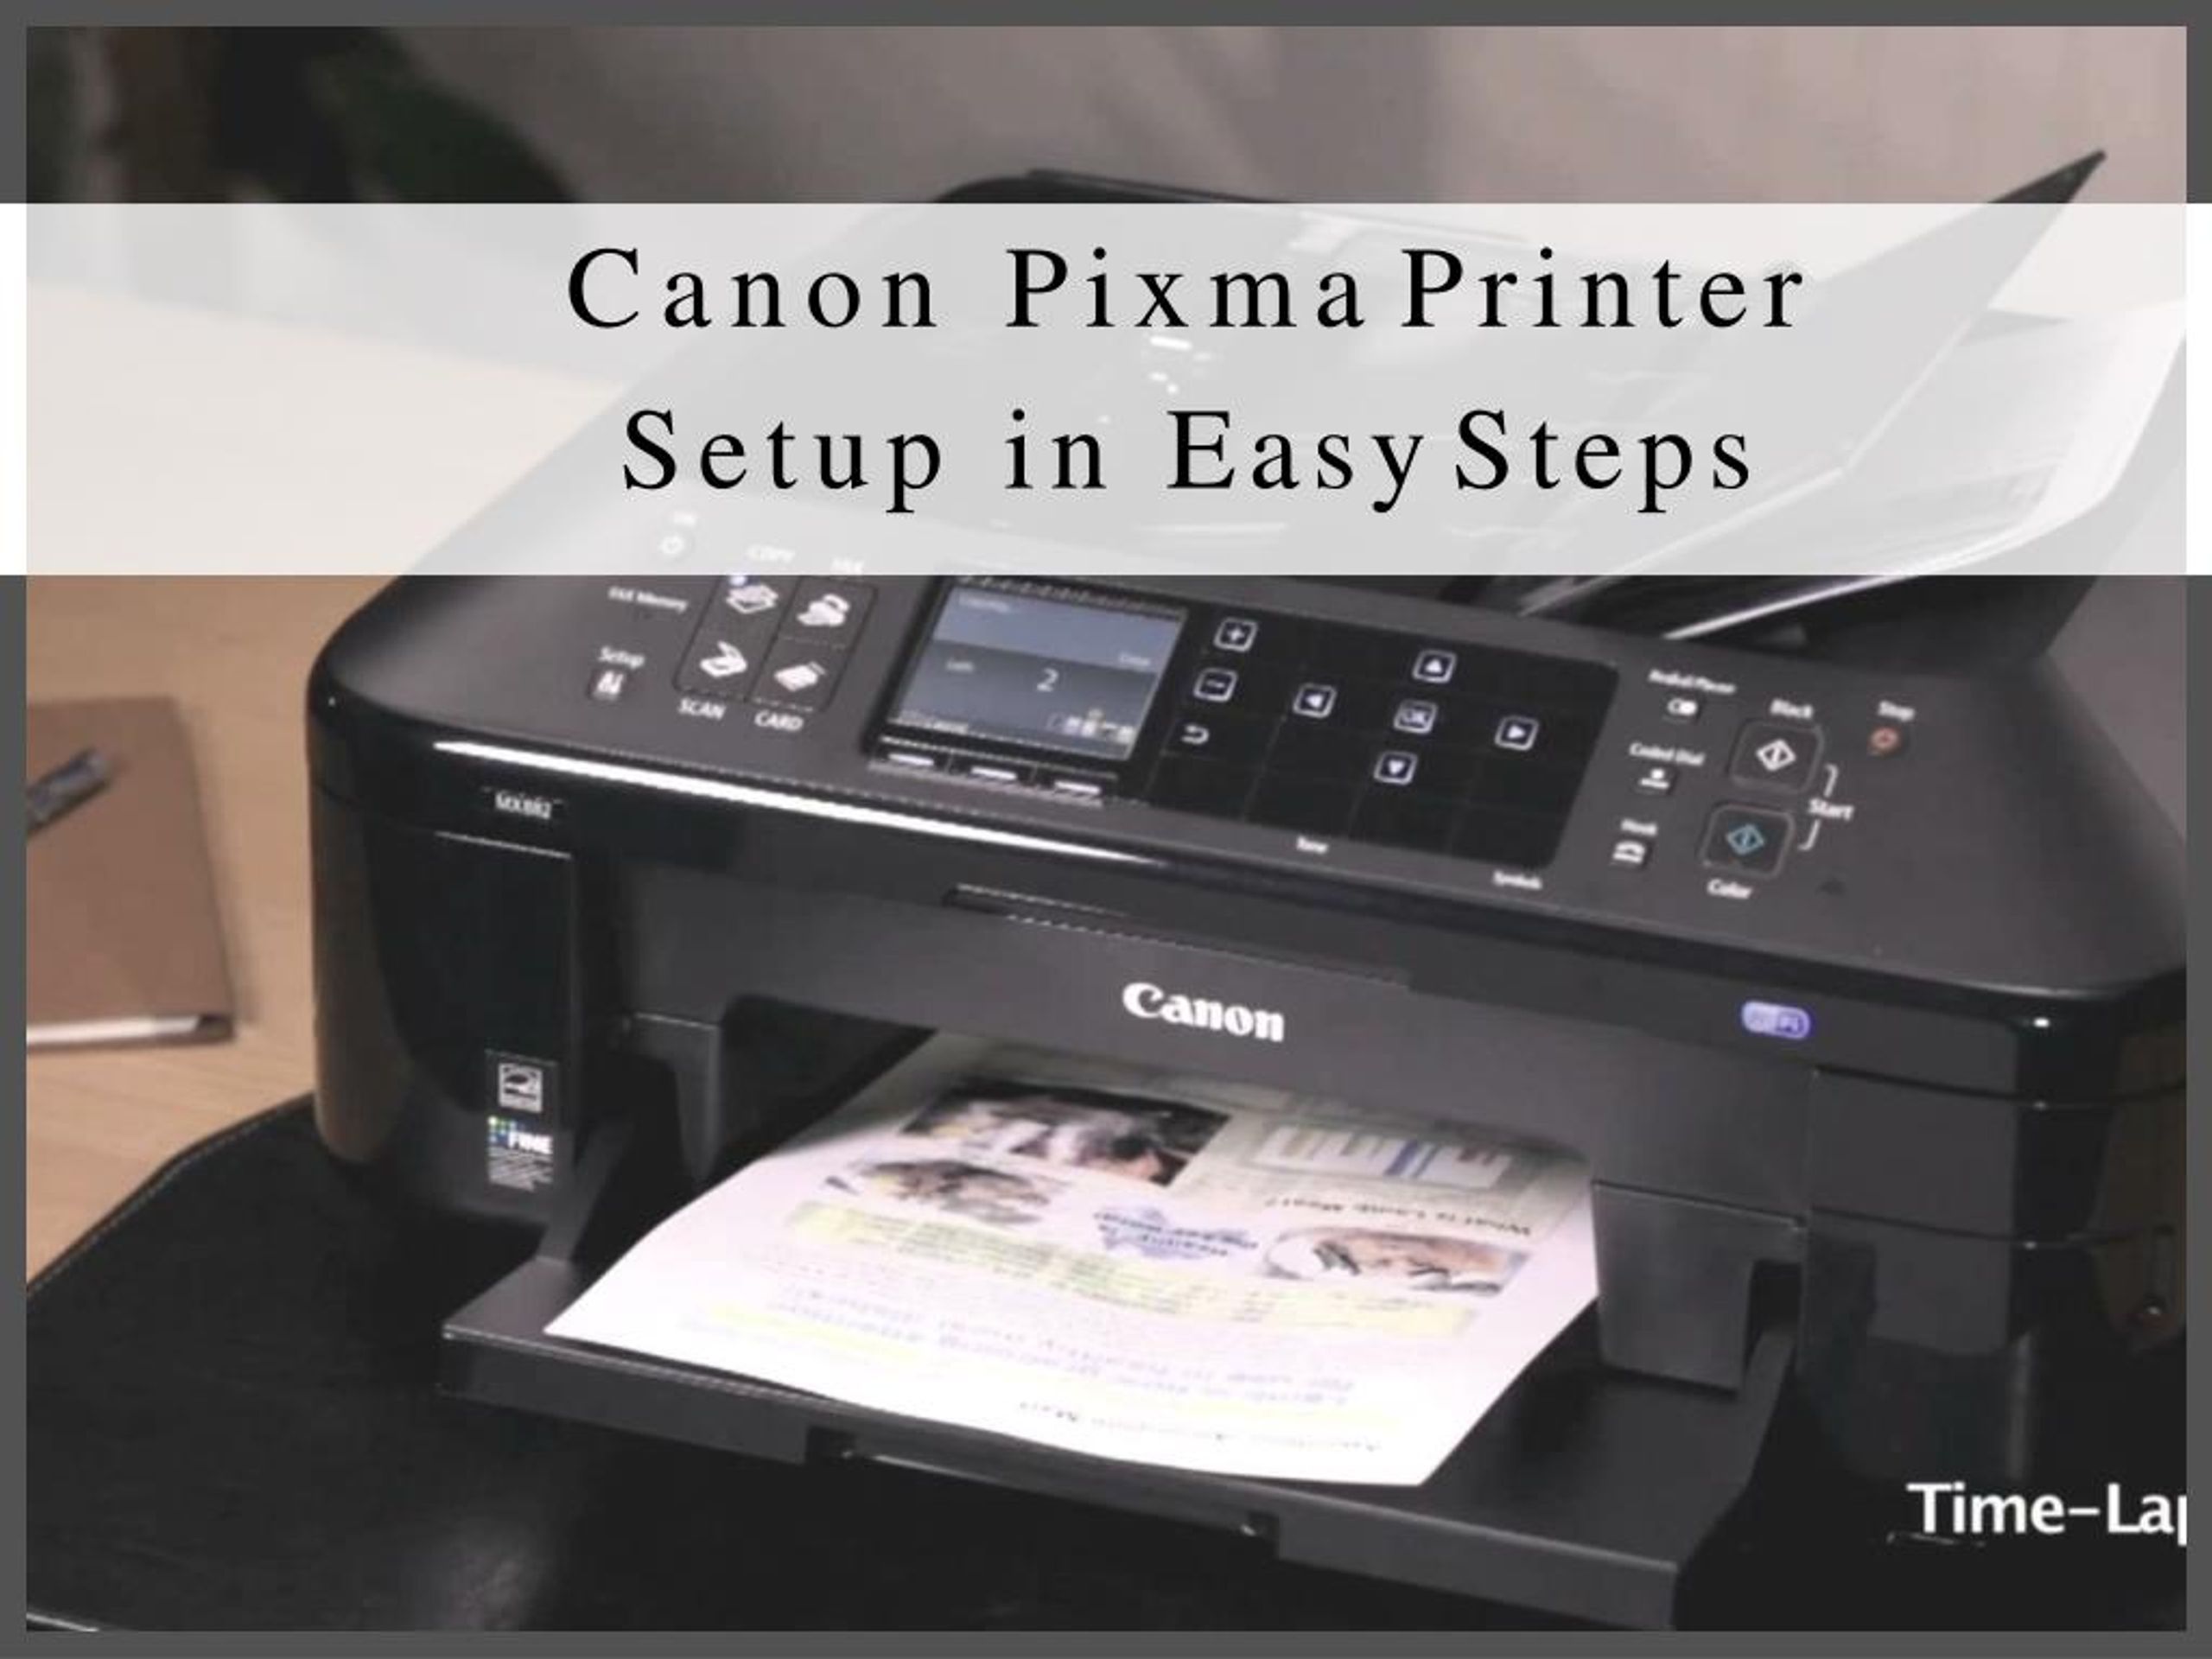 Ppt Canon Pixma Printer Setup In Easy Steps Powerpoint Presentation Free Download Id7825287 3193